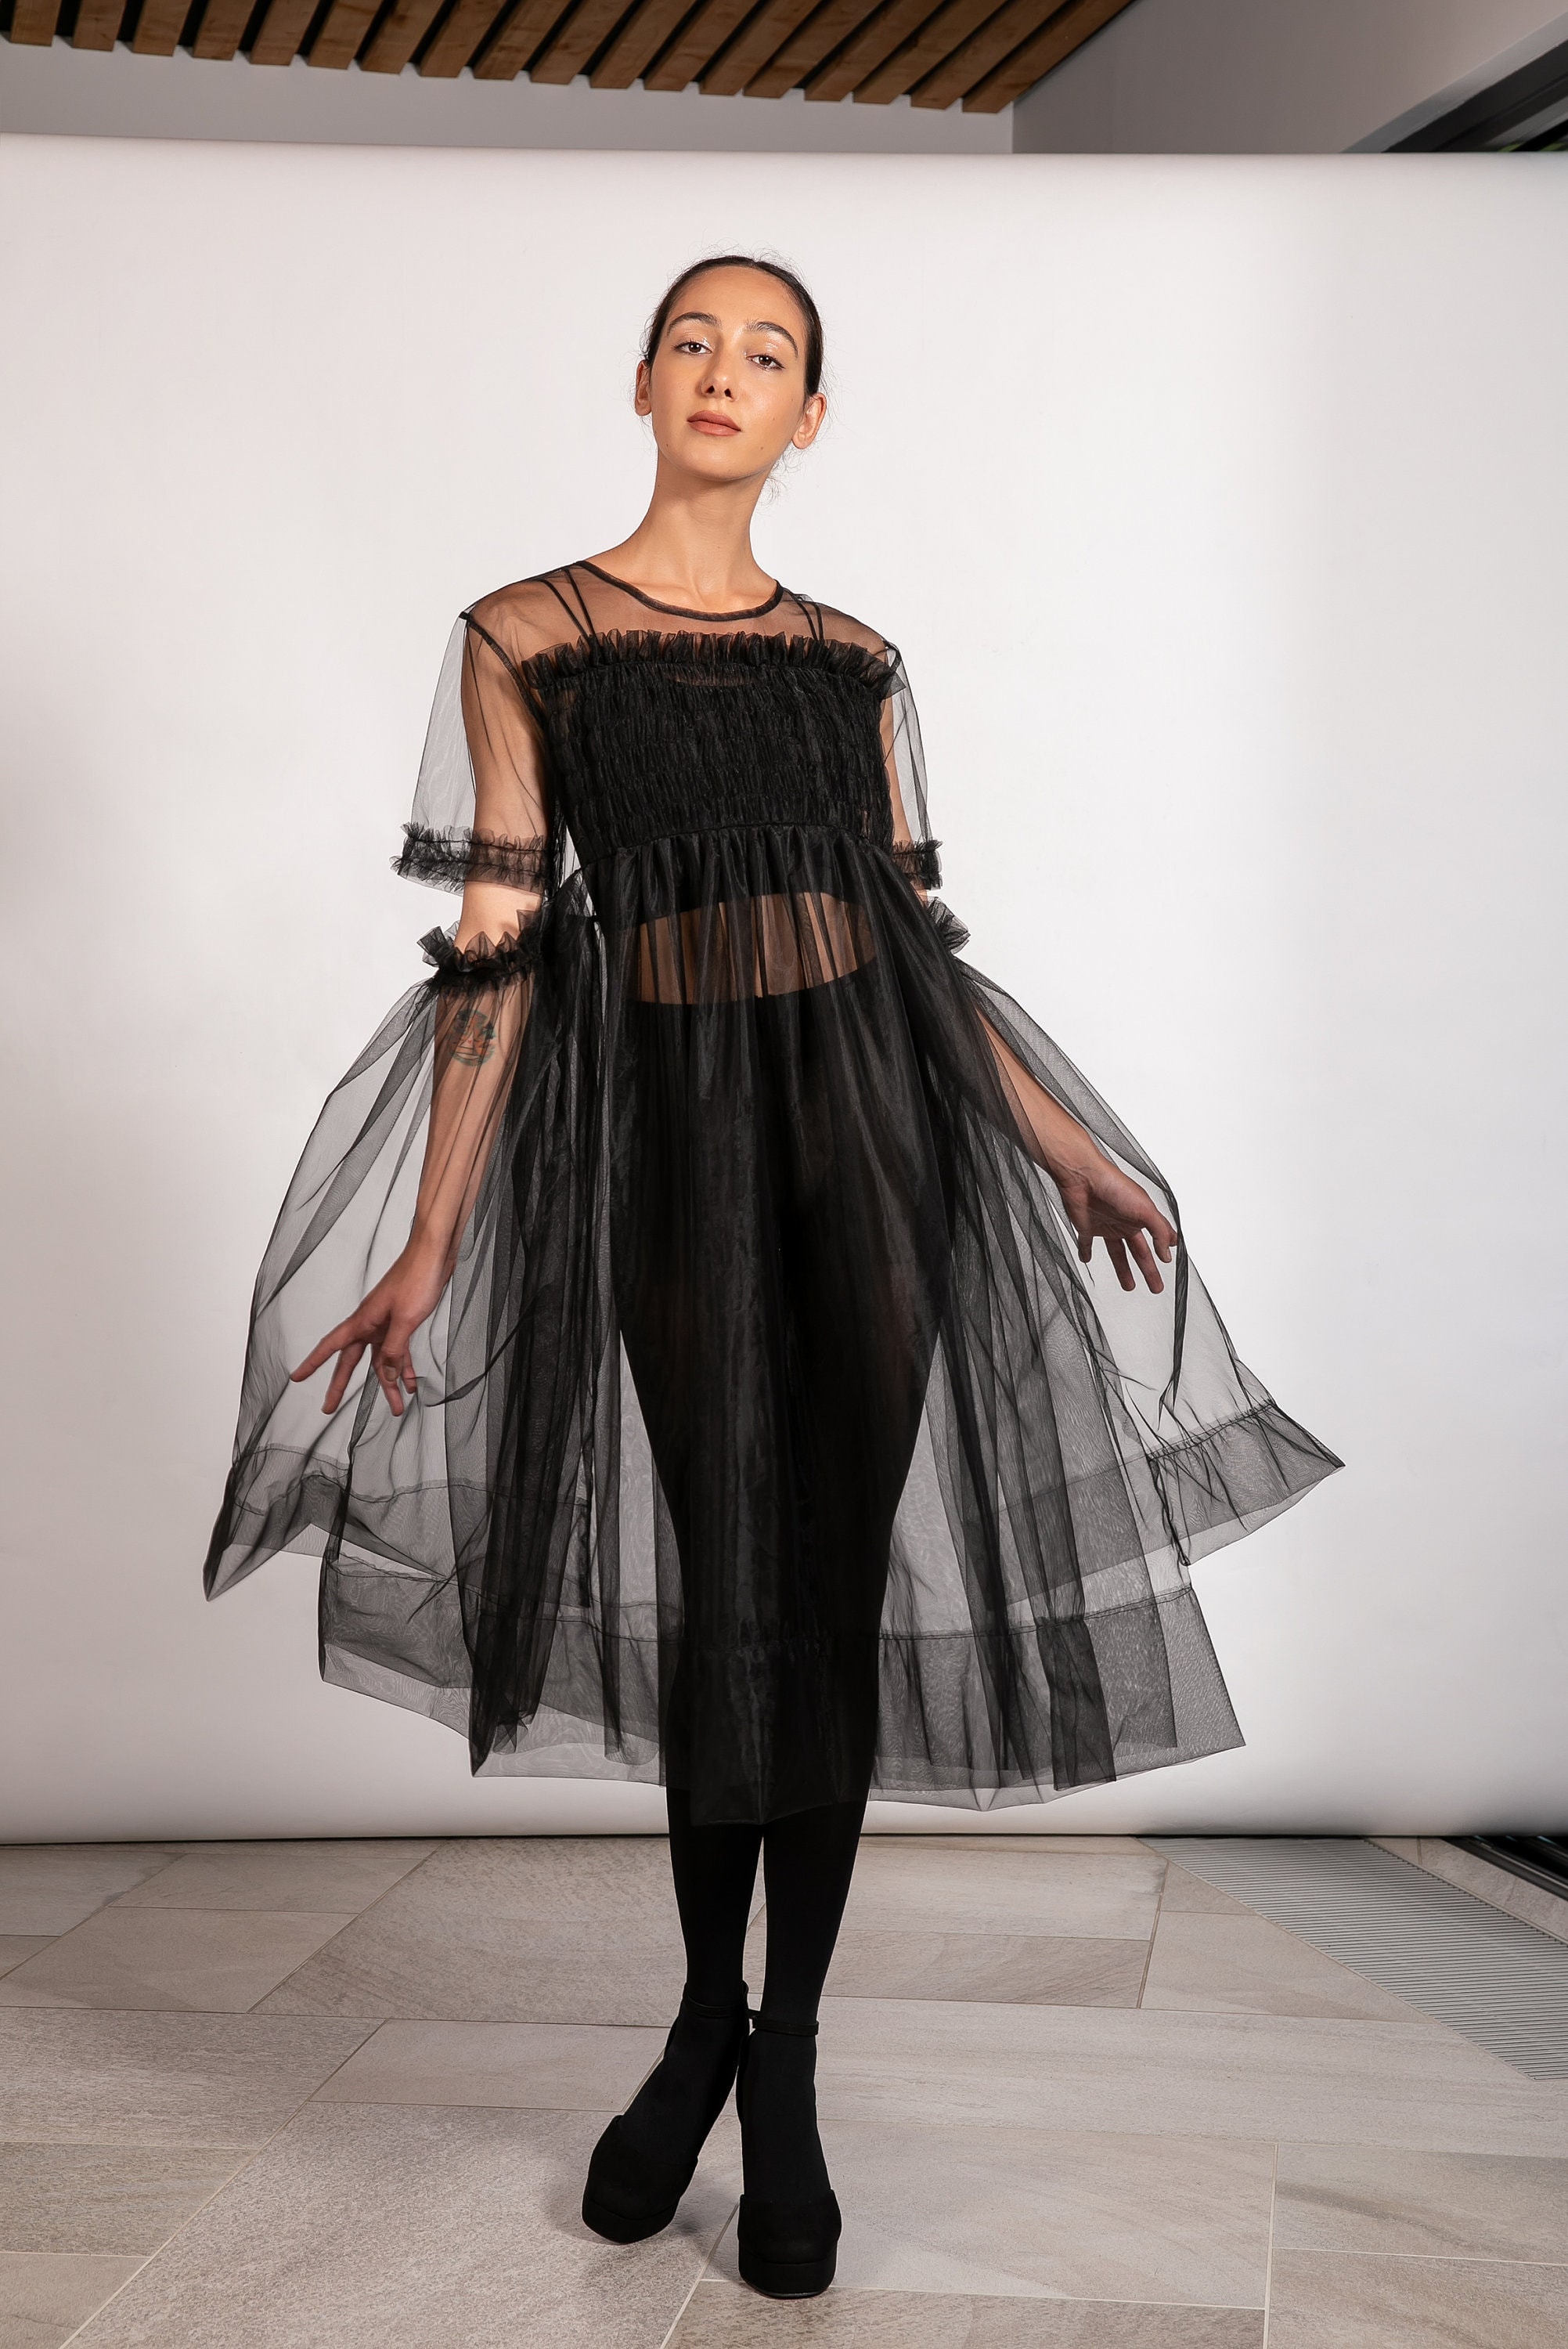 Black Tulle Dress, Sheer Party Dress, Tulle Cocktail Dress